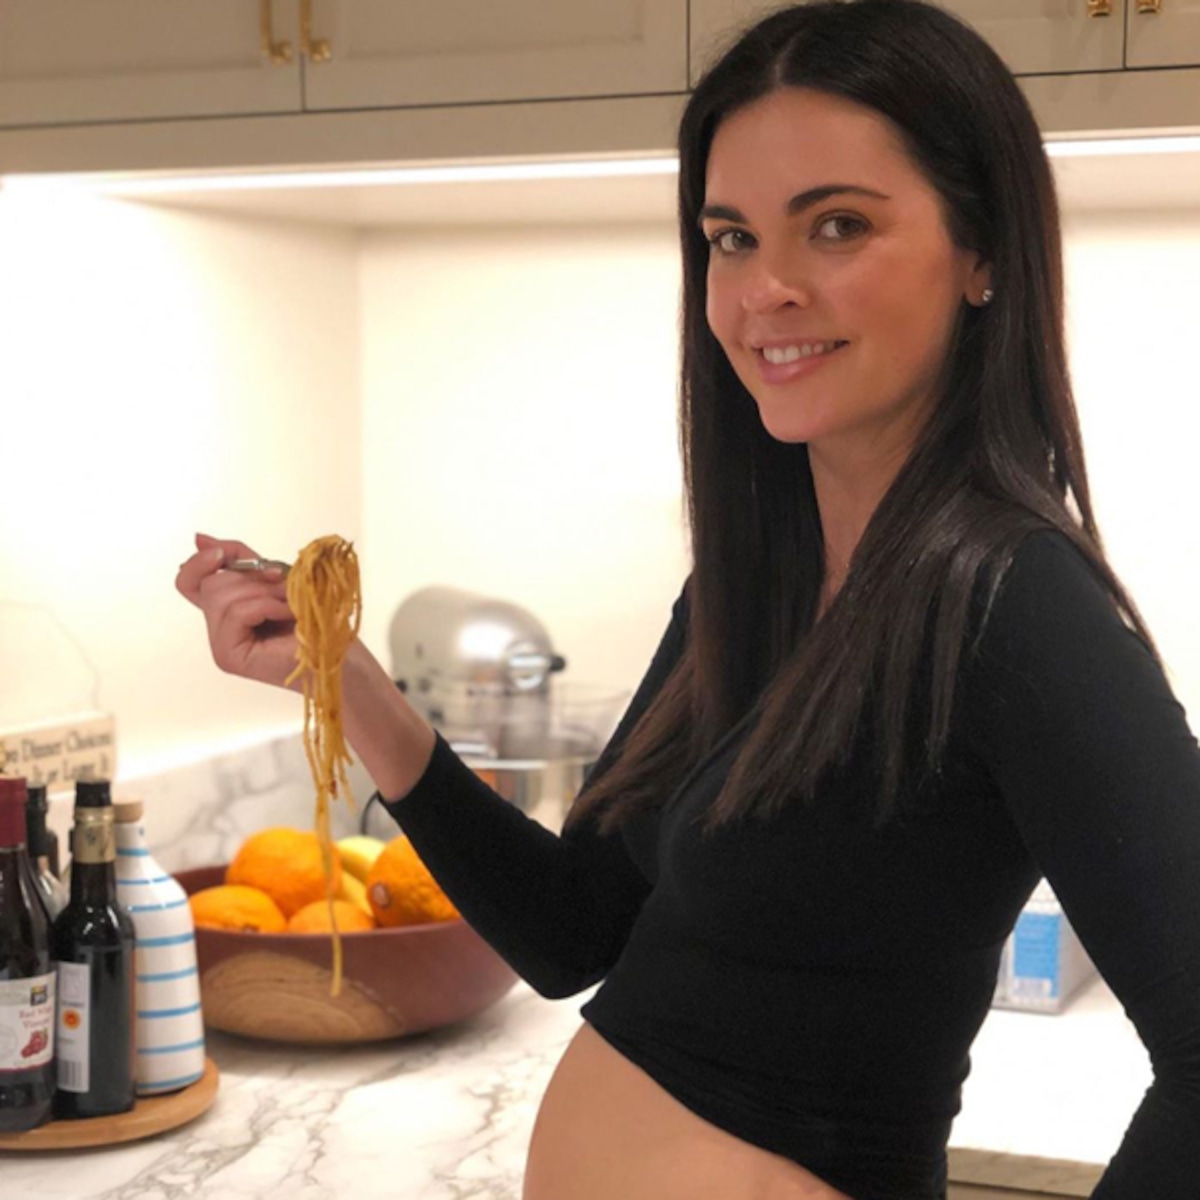 Food Network's Katie Lee Is Pregnant After Fertility Struggles - E! Online